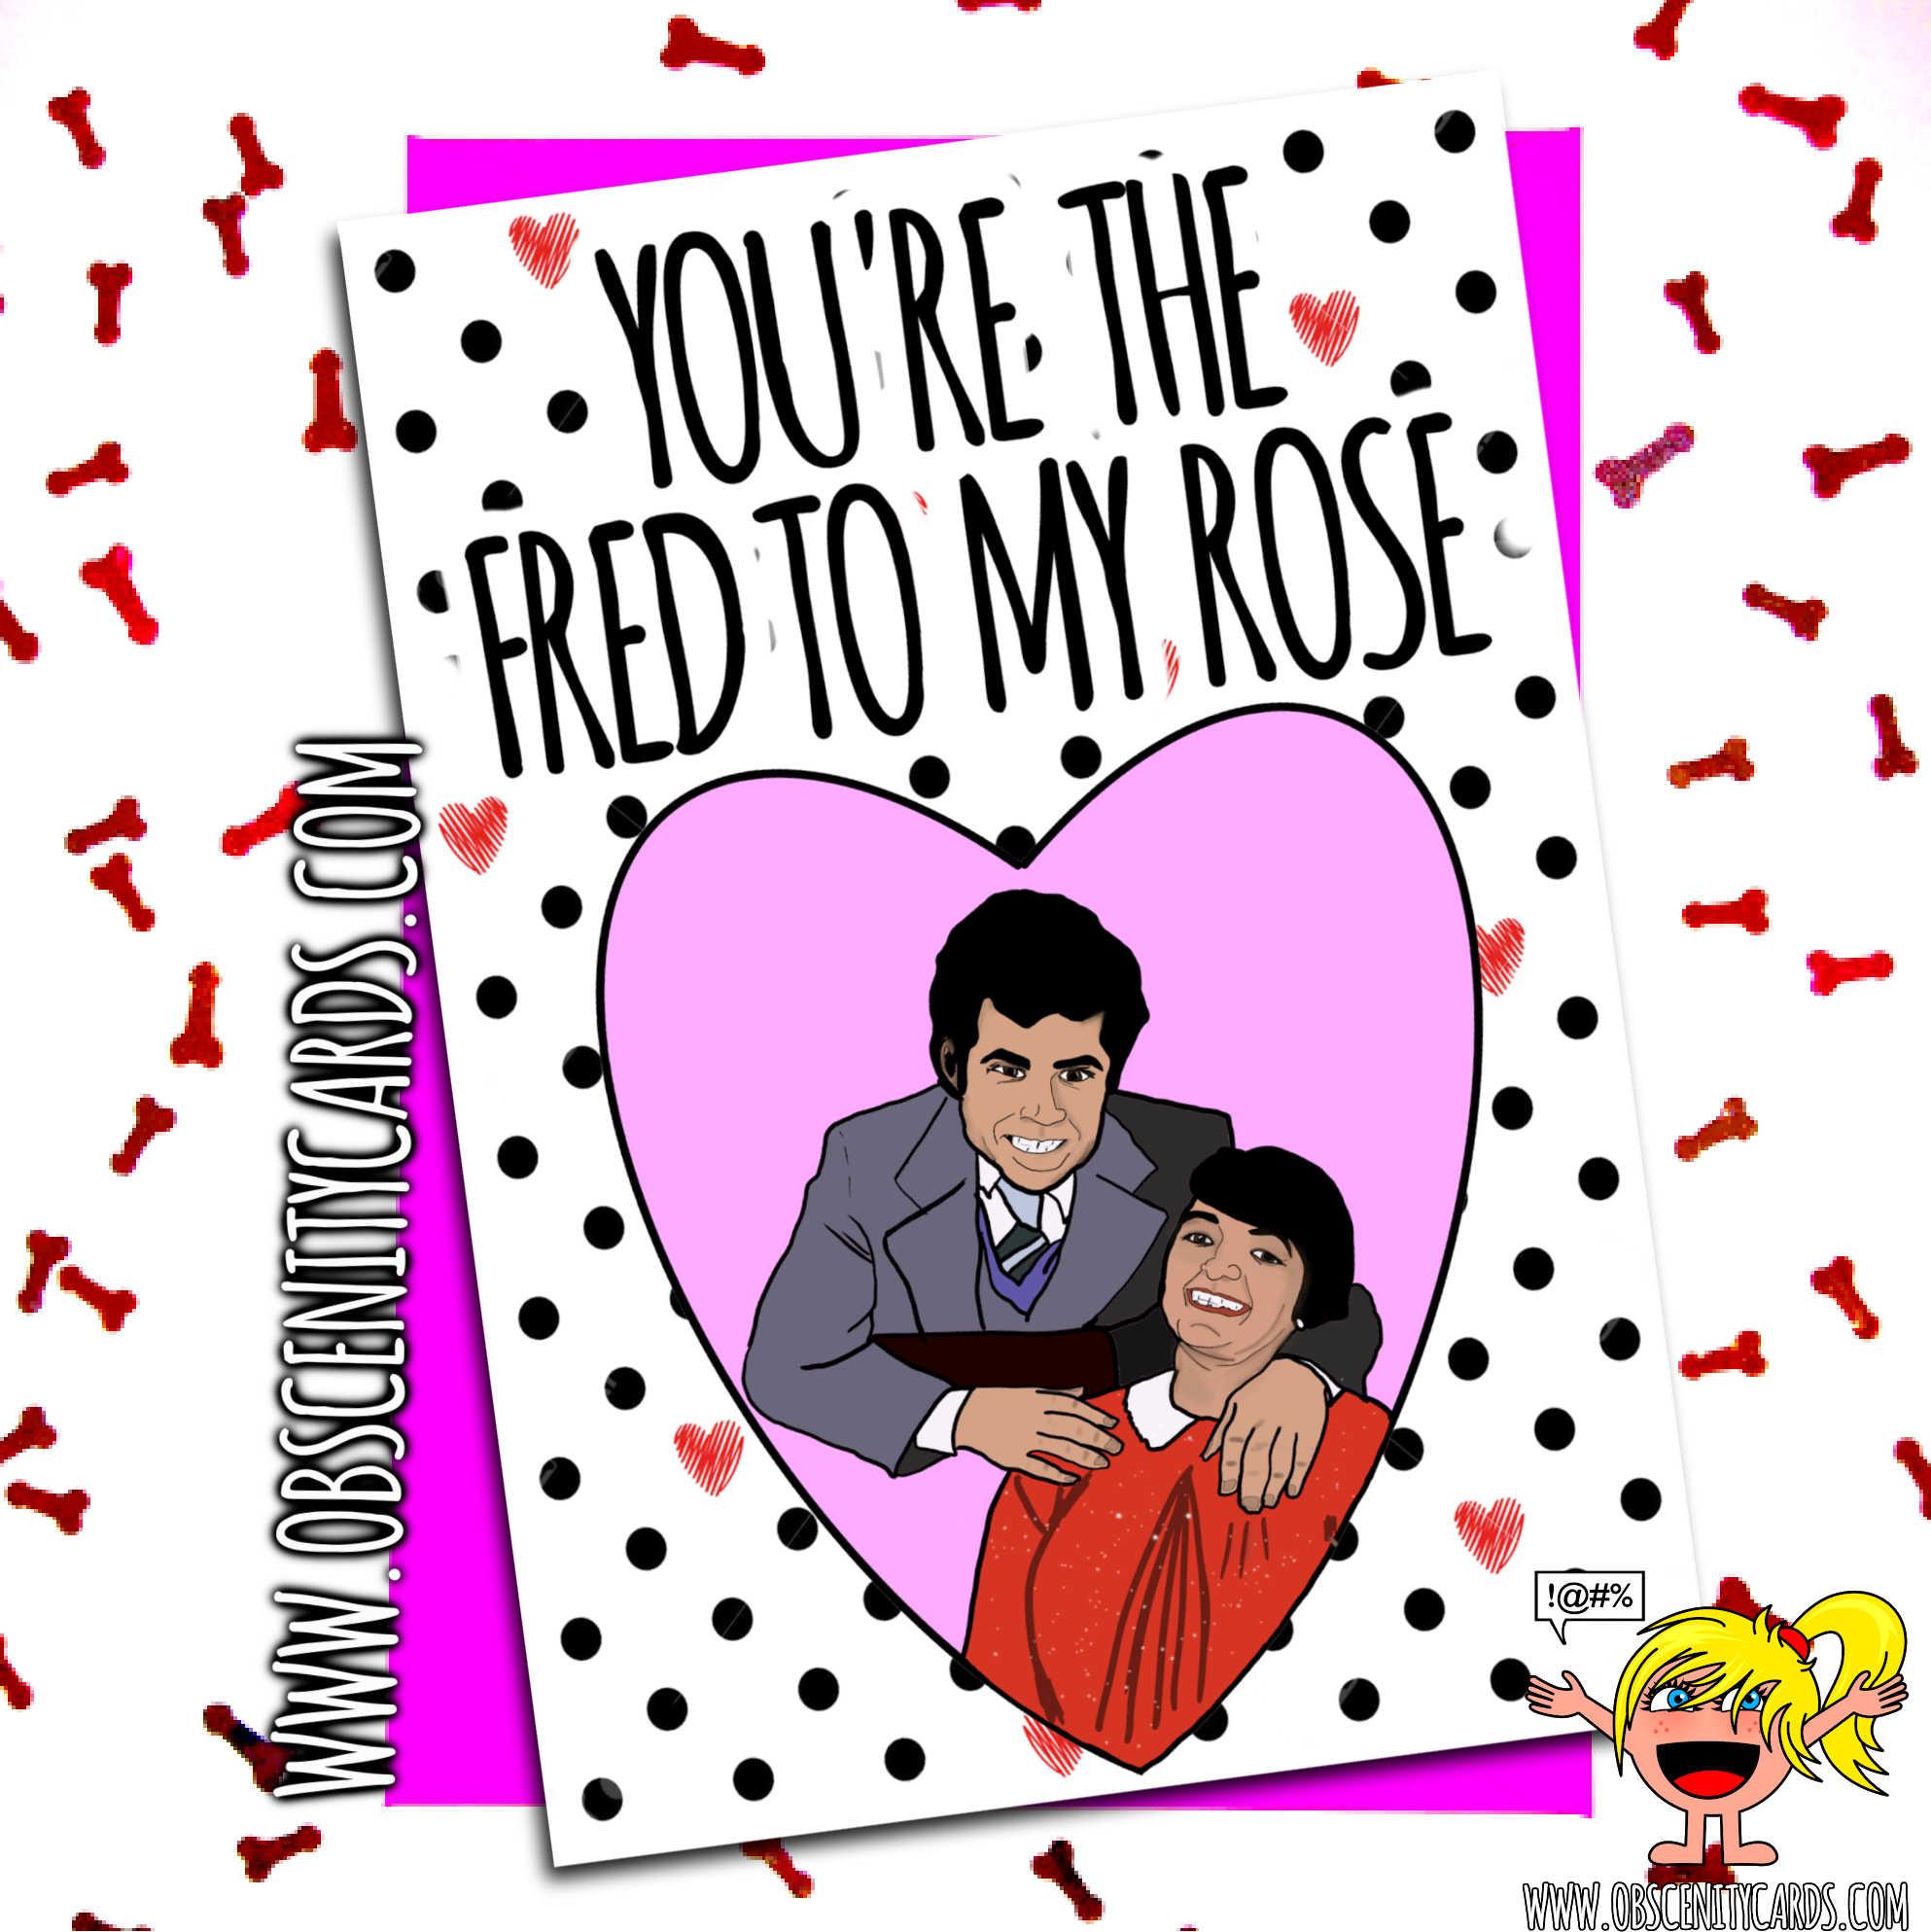 YOU'RE THE FRED TO MY ROSE FUNNY VALENTINES ANNIVERSARY CARD